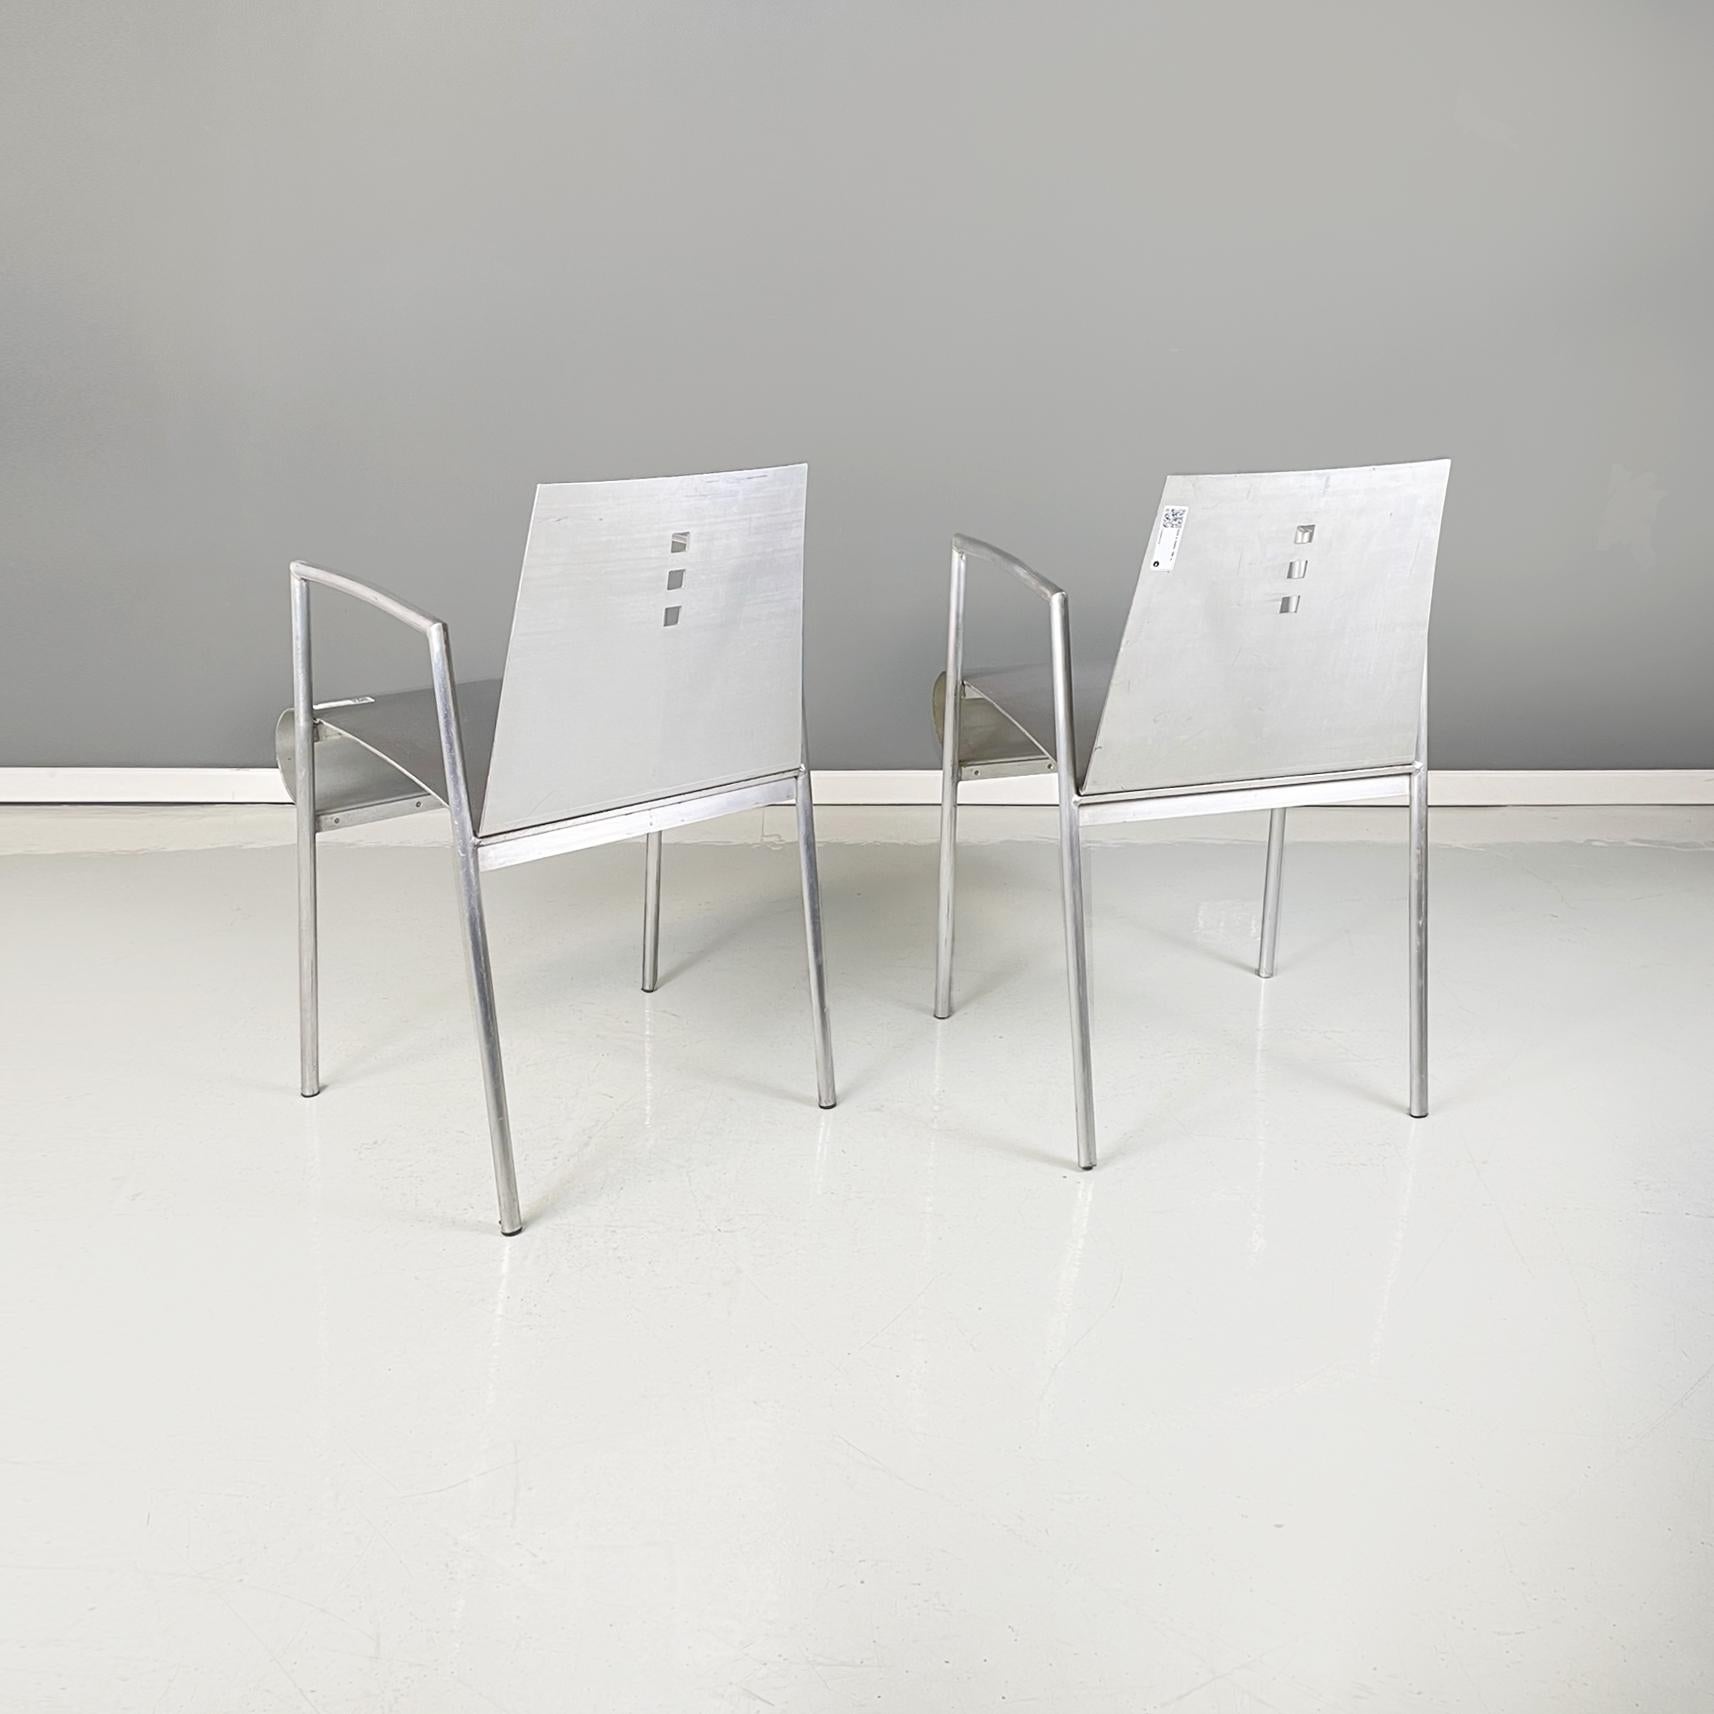 Italian Modern Curved Metal Chairs with Armrests, 1980s For Sale 1